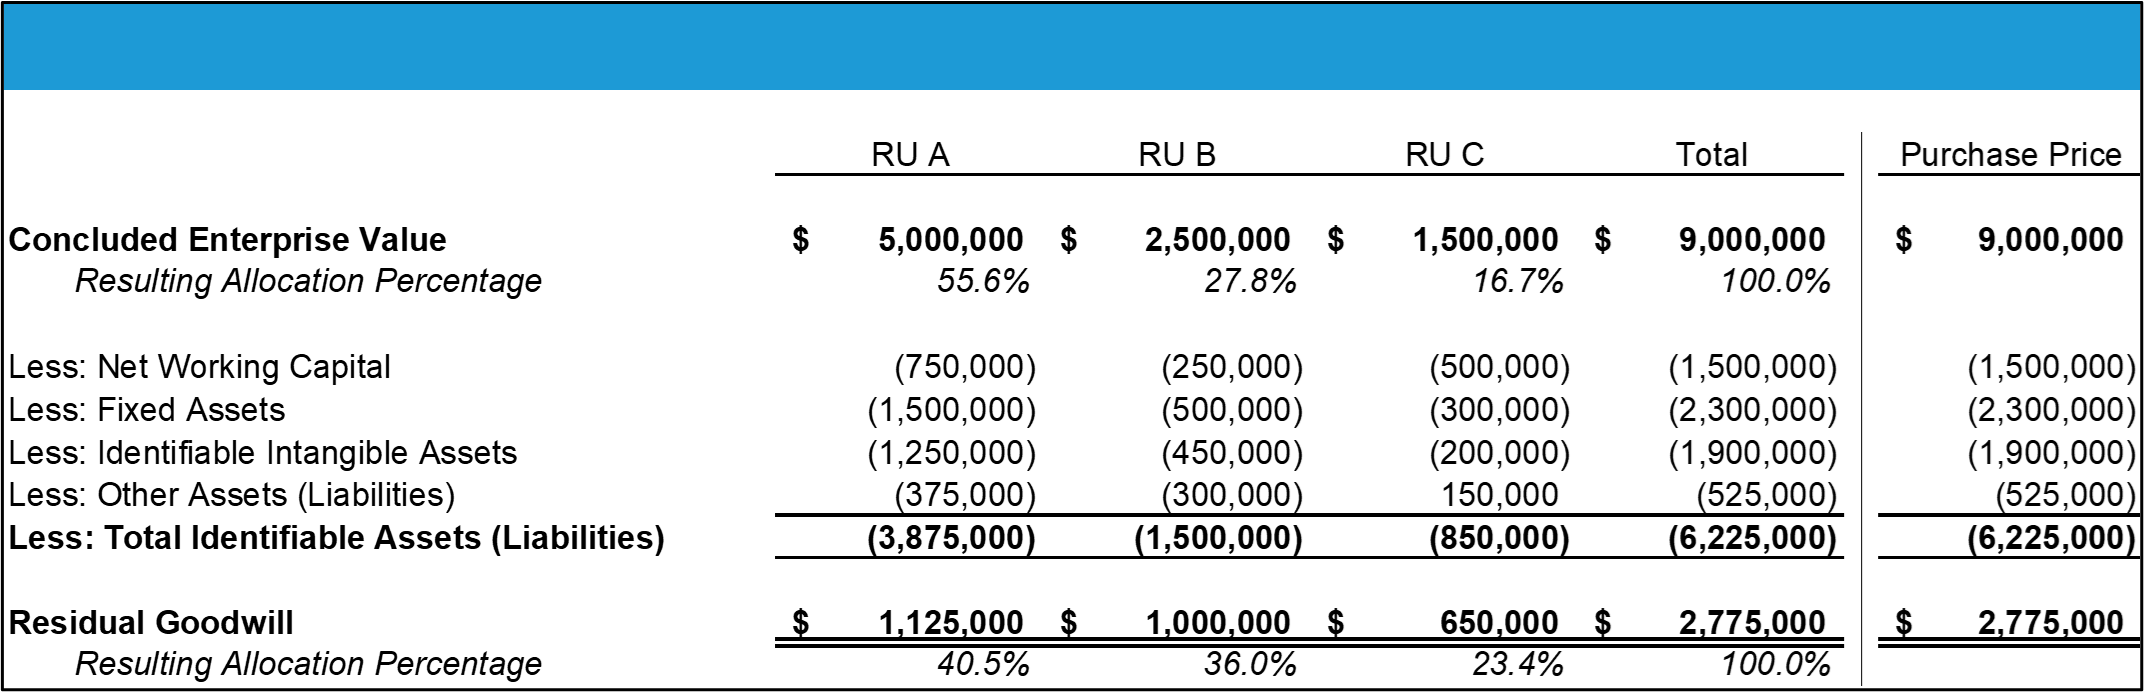 Acquisition Accounting (in thousands of U.S. dollars)